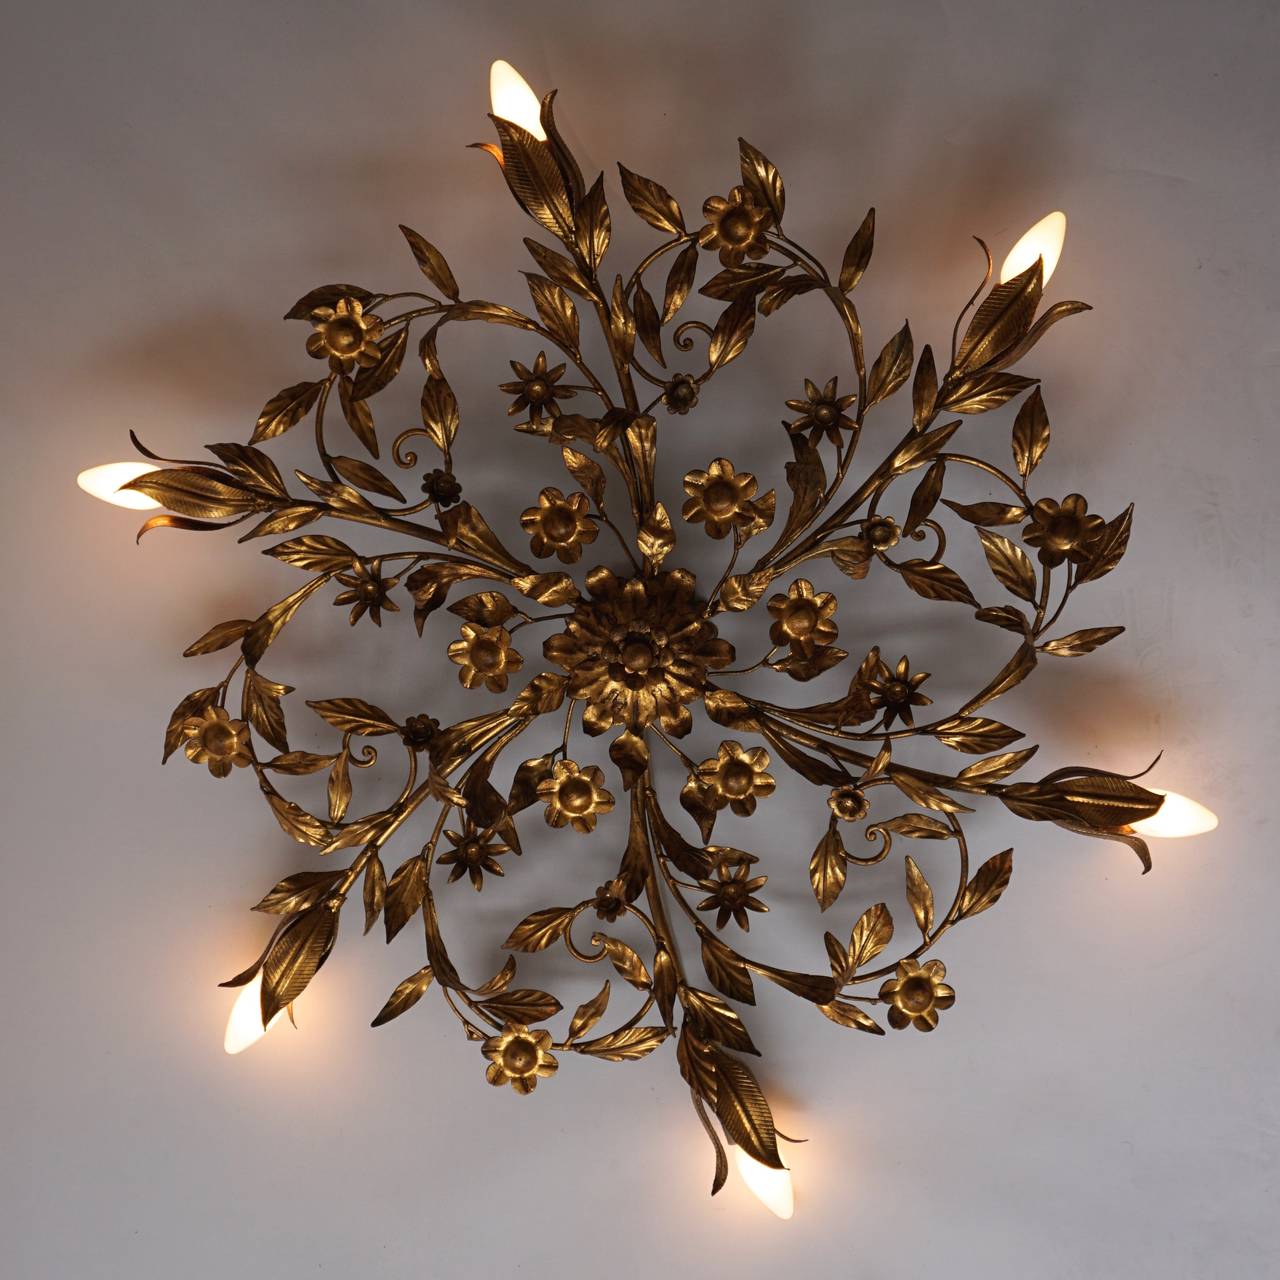 A fabulous organic sculpted metal flush mount covered in gold gilded enamel.
Marked, Ciani Firenze.
Takes eight bulbs. 
Very good condition with no missing branches or leafs.

 87 cm diameter and eight bulbs.